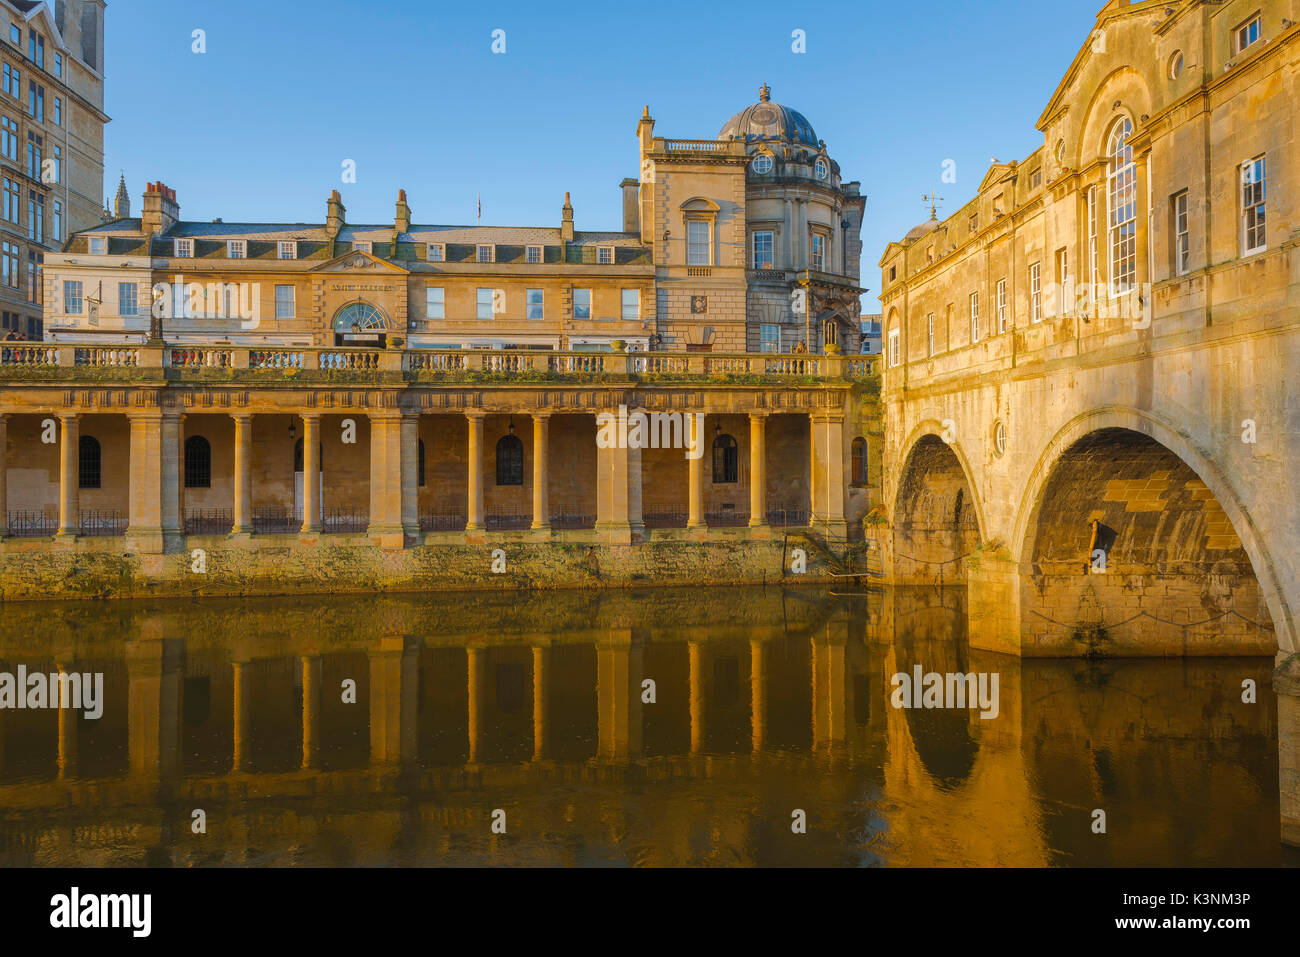 Bath historic, Pulteney Bridge and a neoclassical Georgian colonnade alongside the River Avon in the centre of the city of Bath, Somerset, England, UK Stock Photo